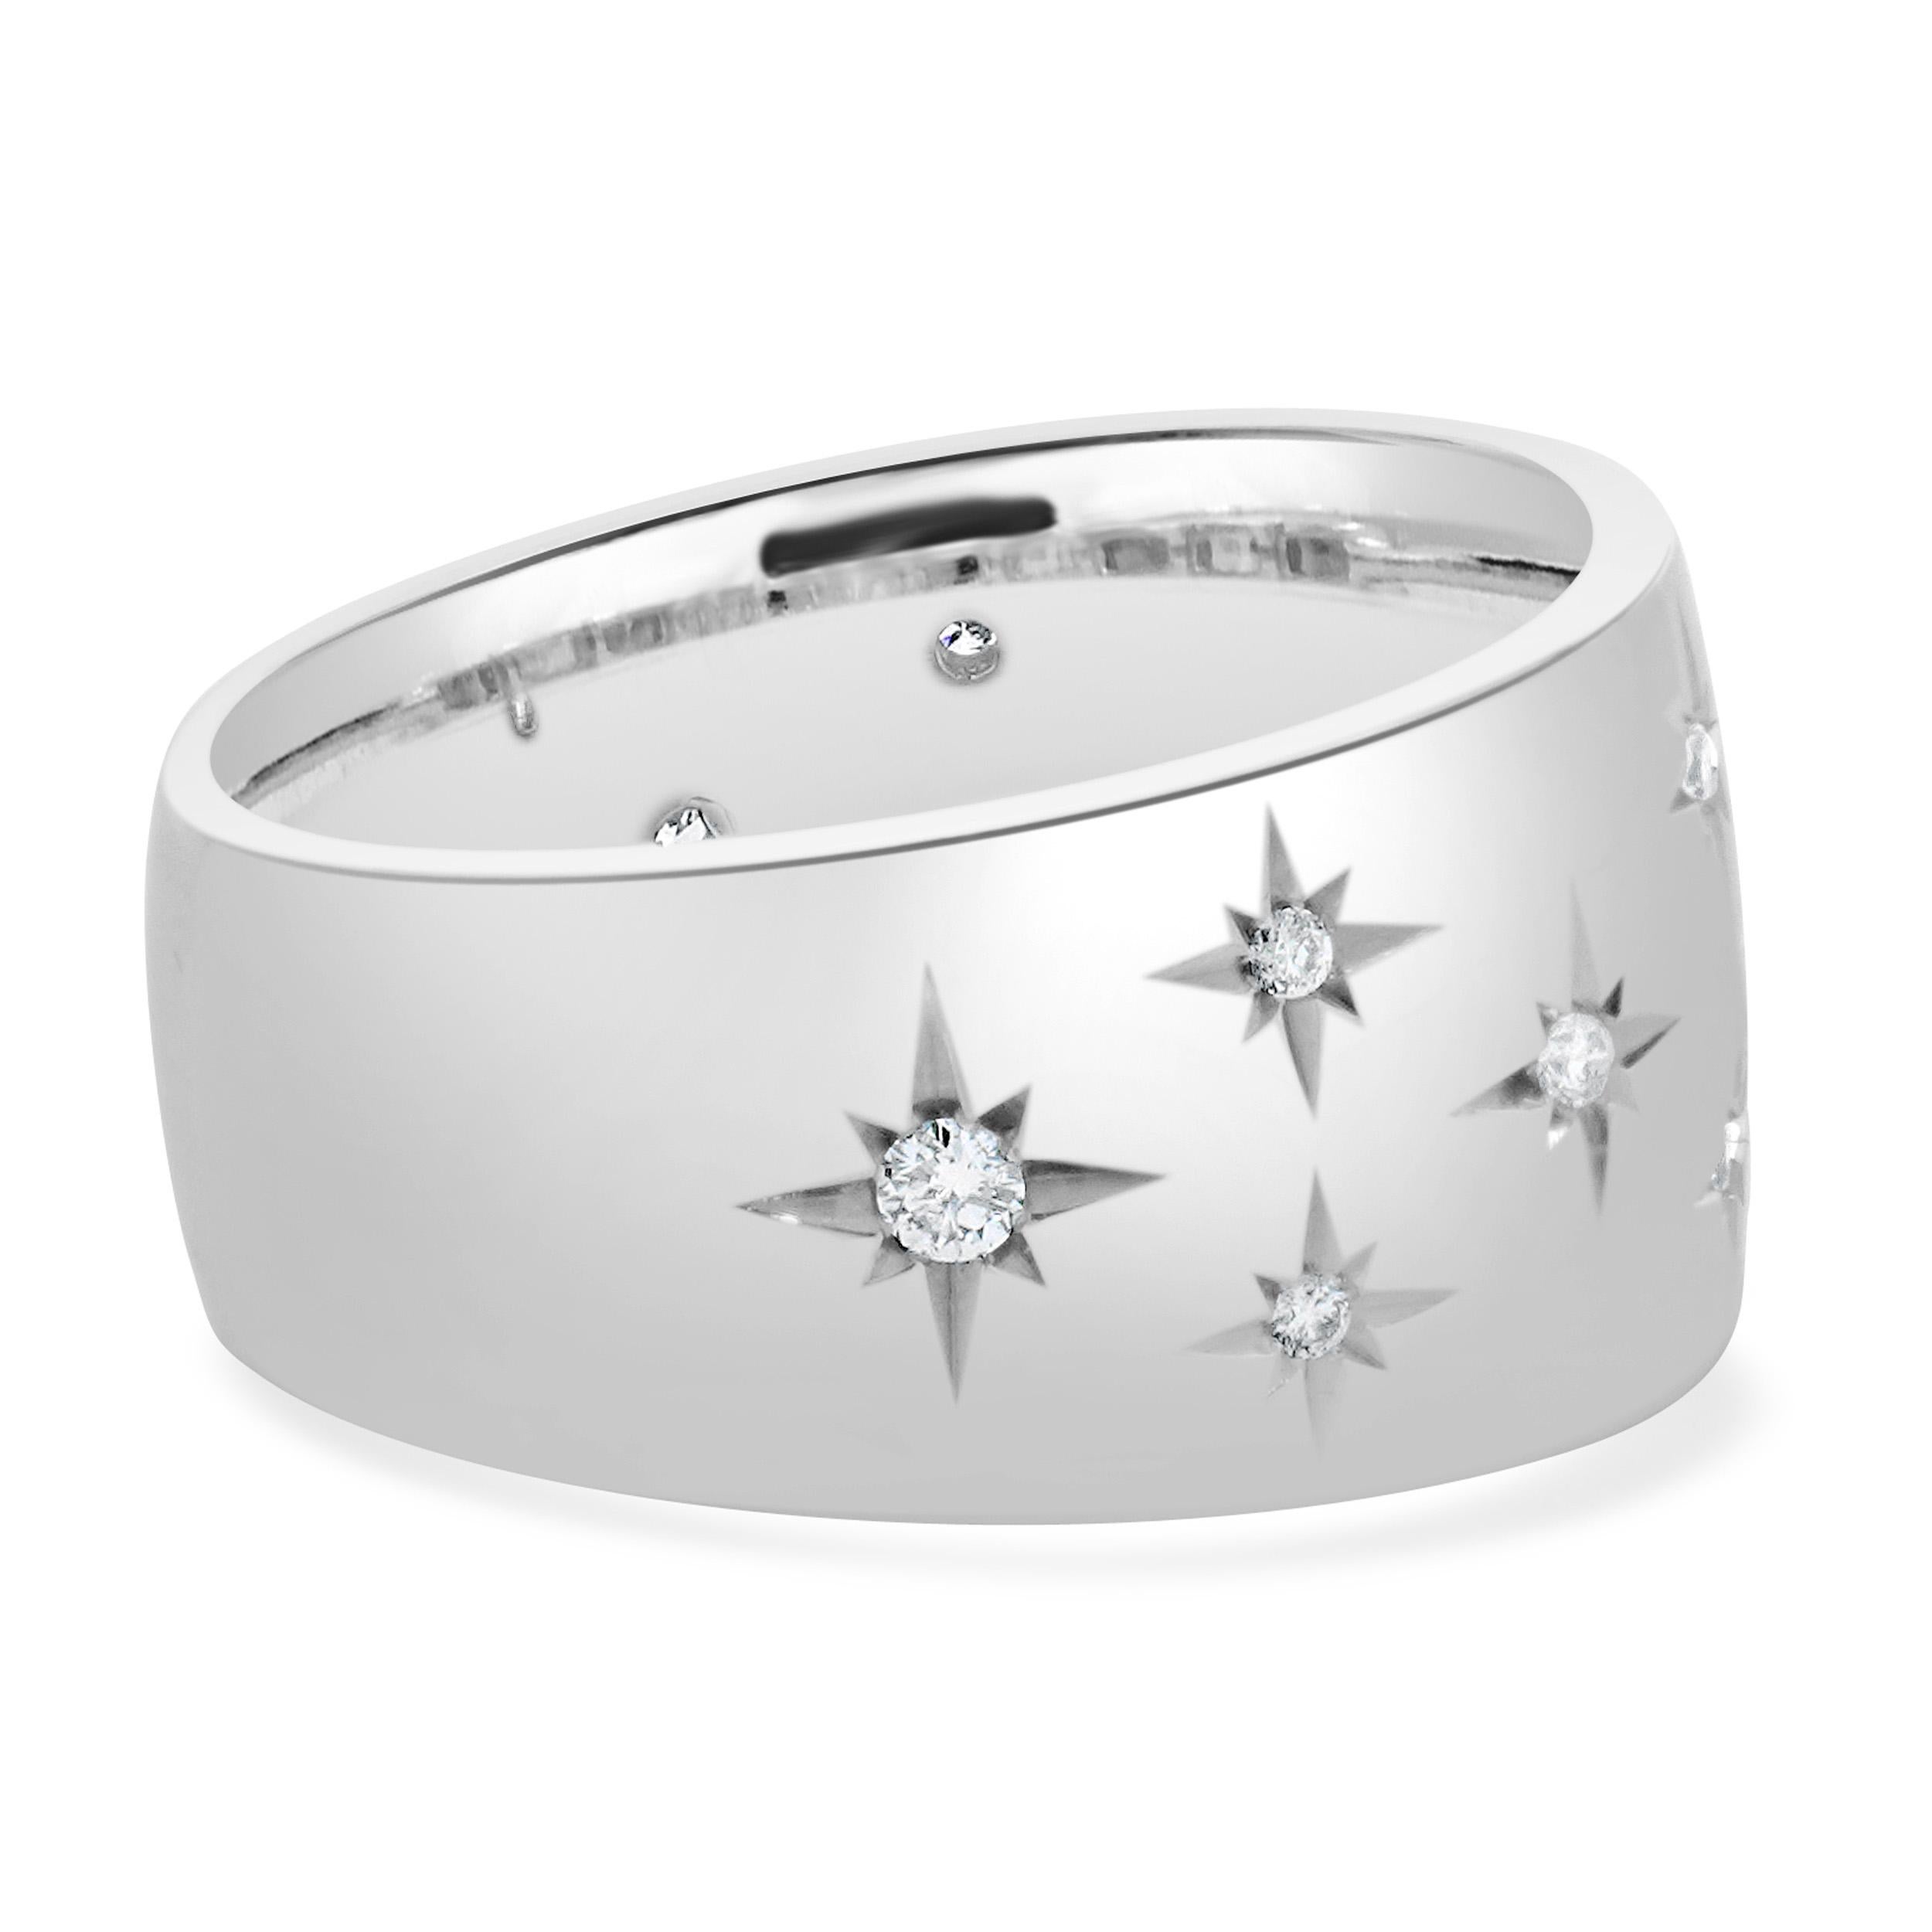 Marchesa 18 Karat White Gold Sprinkled Diamond Star Band In Excellent Condition For Sale In Scottsdale, AZ